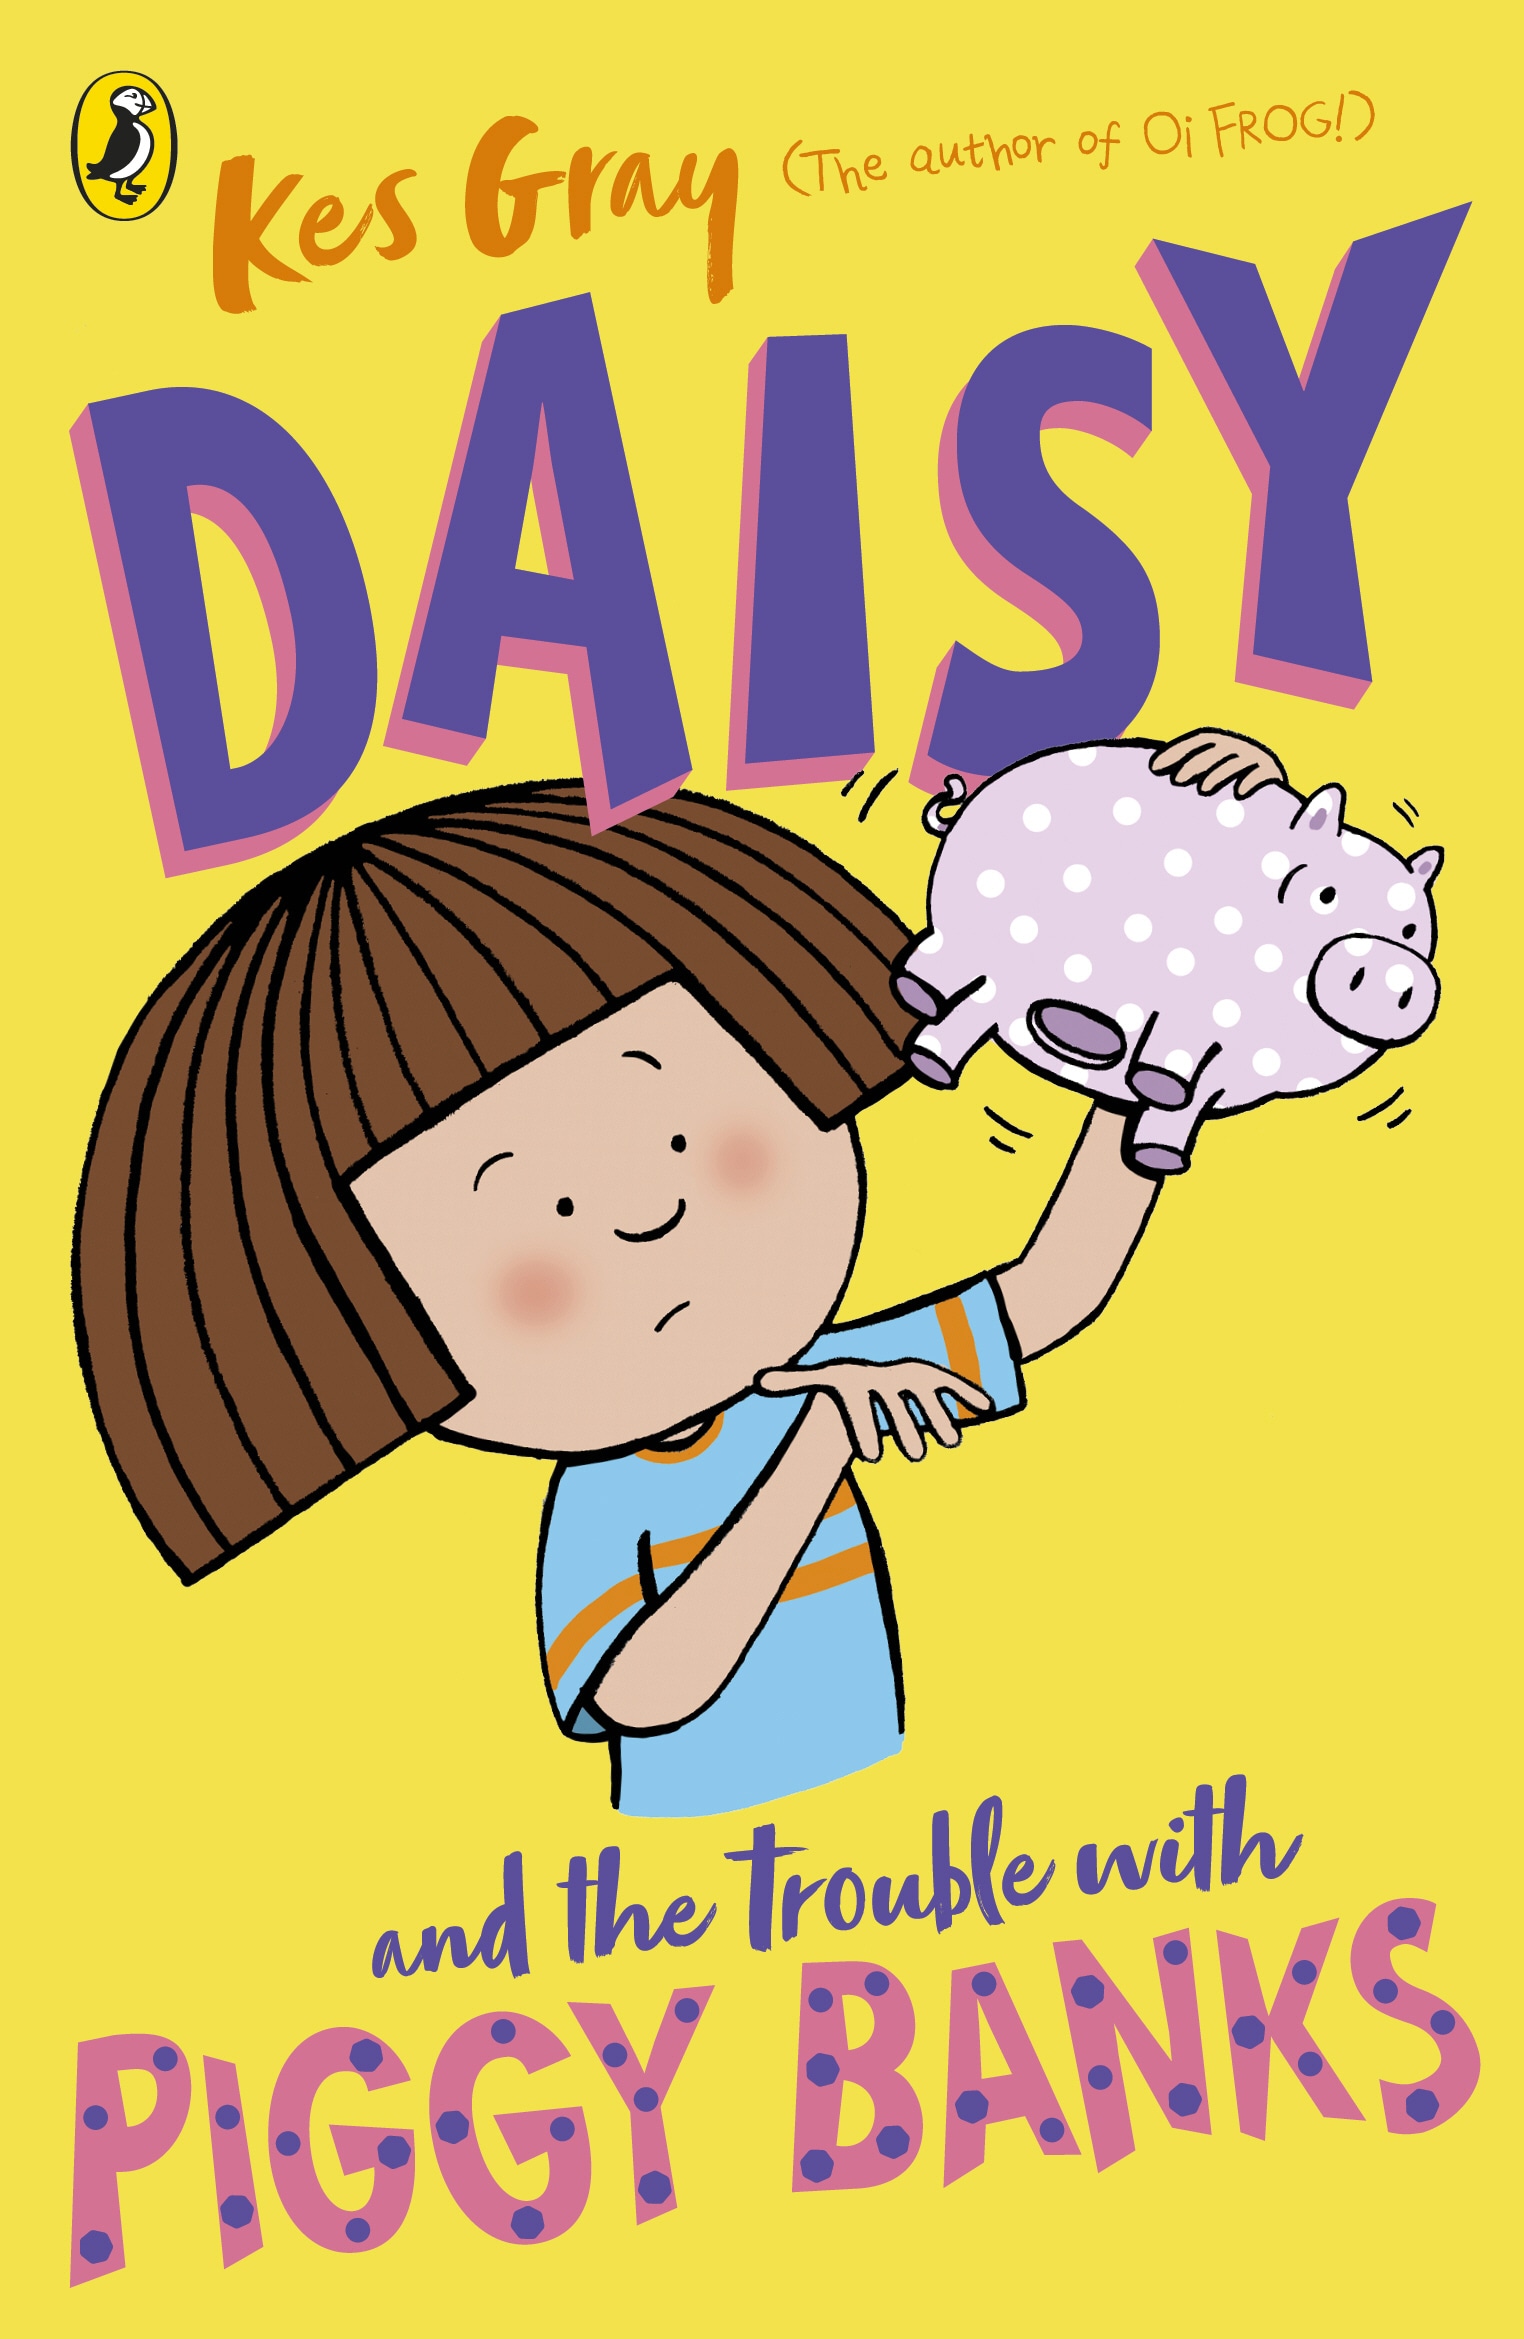 Book “Daisy and the Trouble with Piggy Banks” by Kes Gray — August 6, 2020